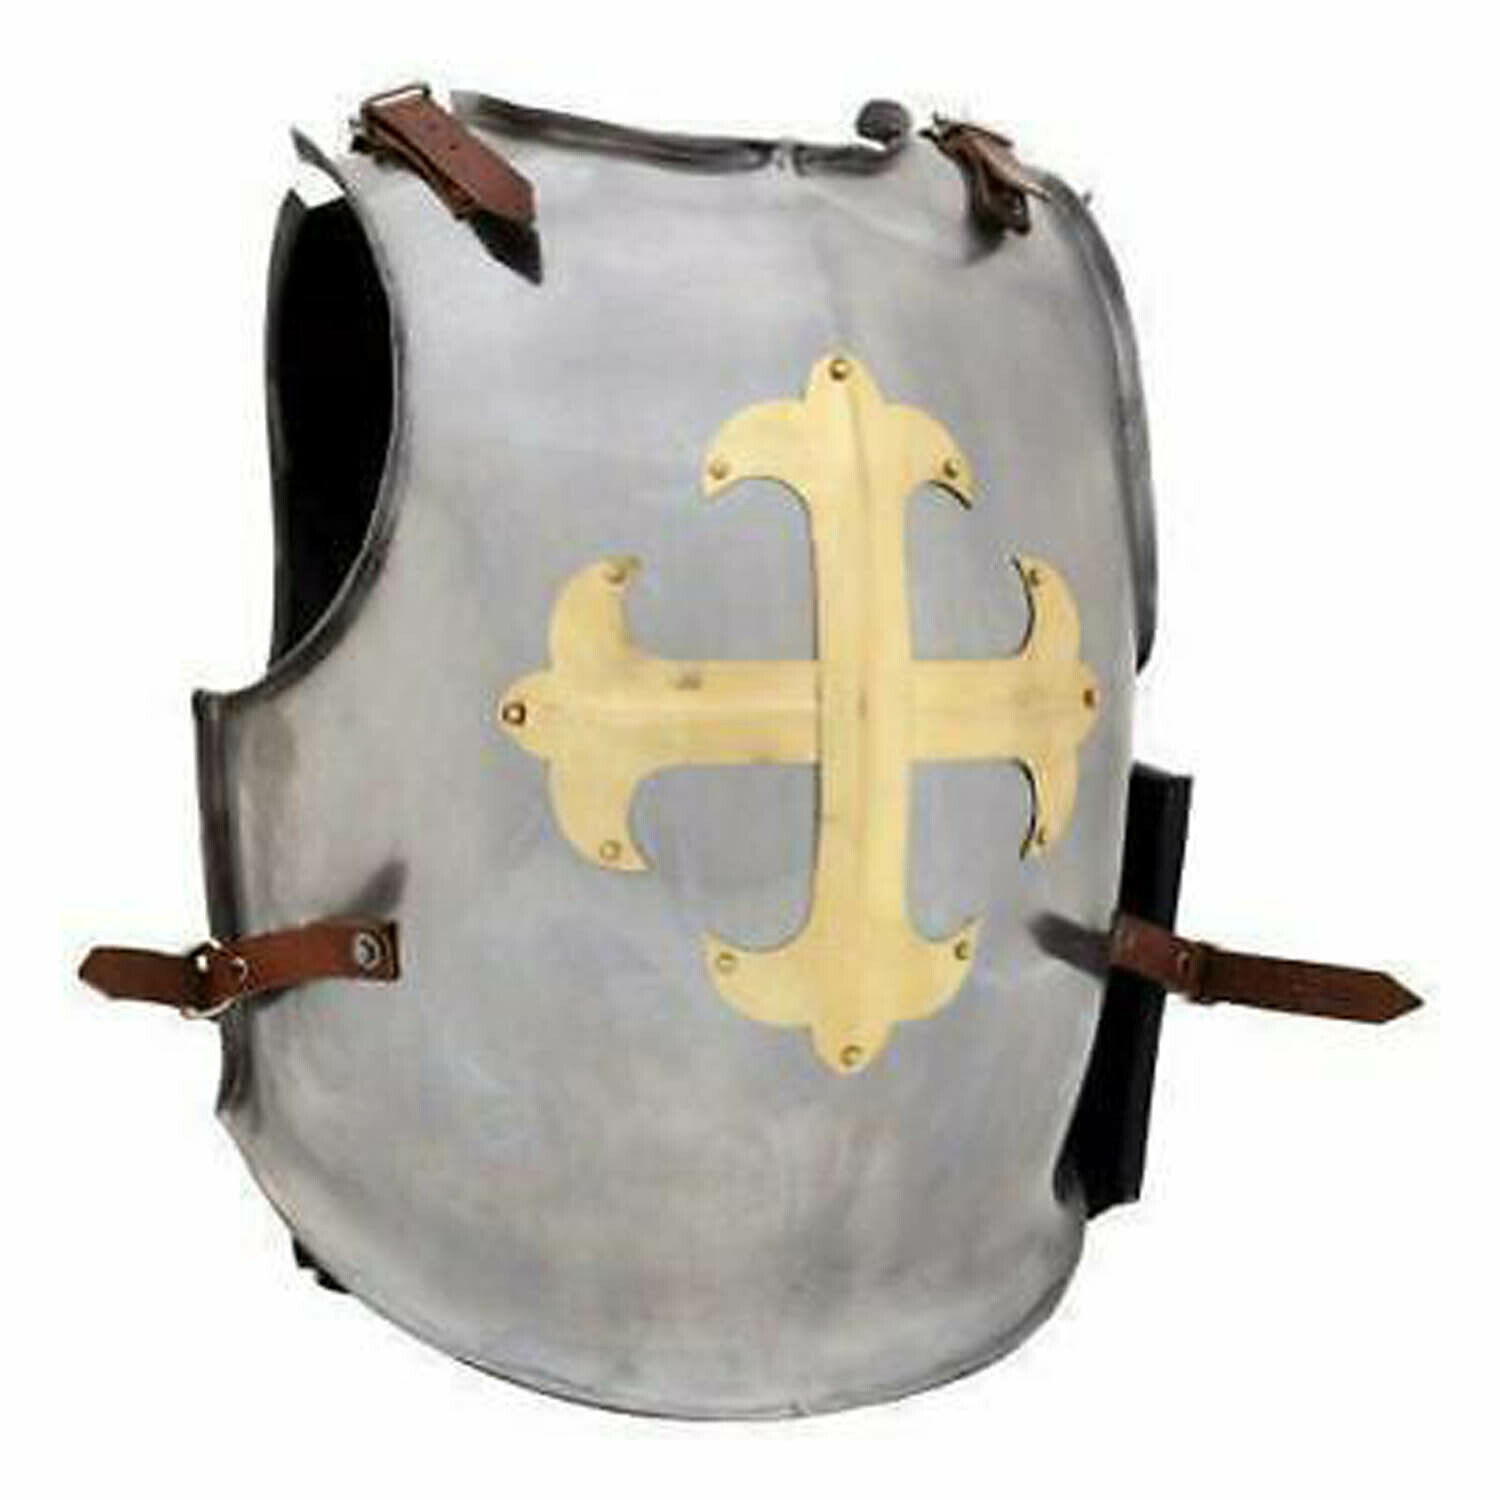 Templar Breast Plate Metallic One Size Fit Most Armour Steel Body Armor Sugarloa